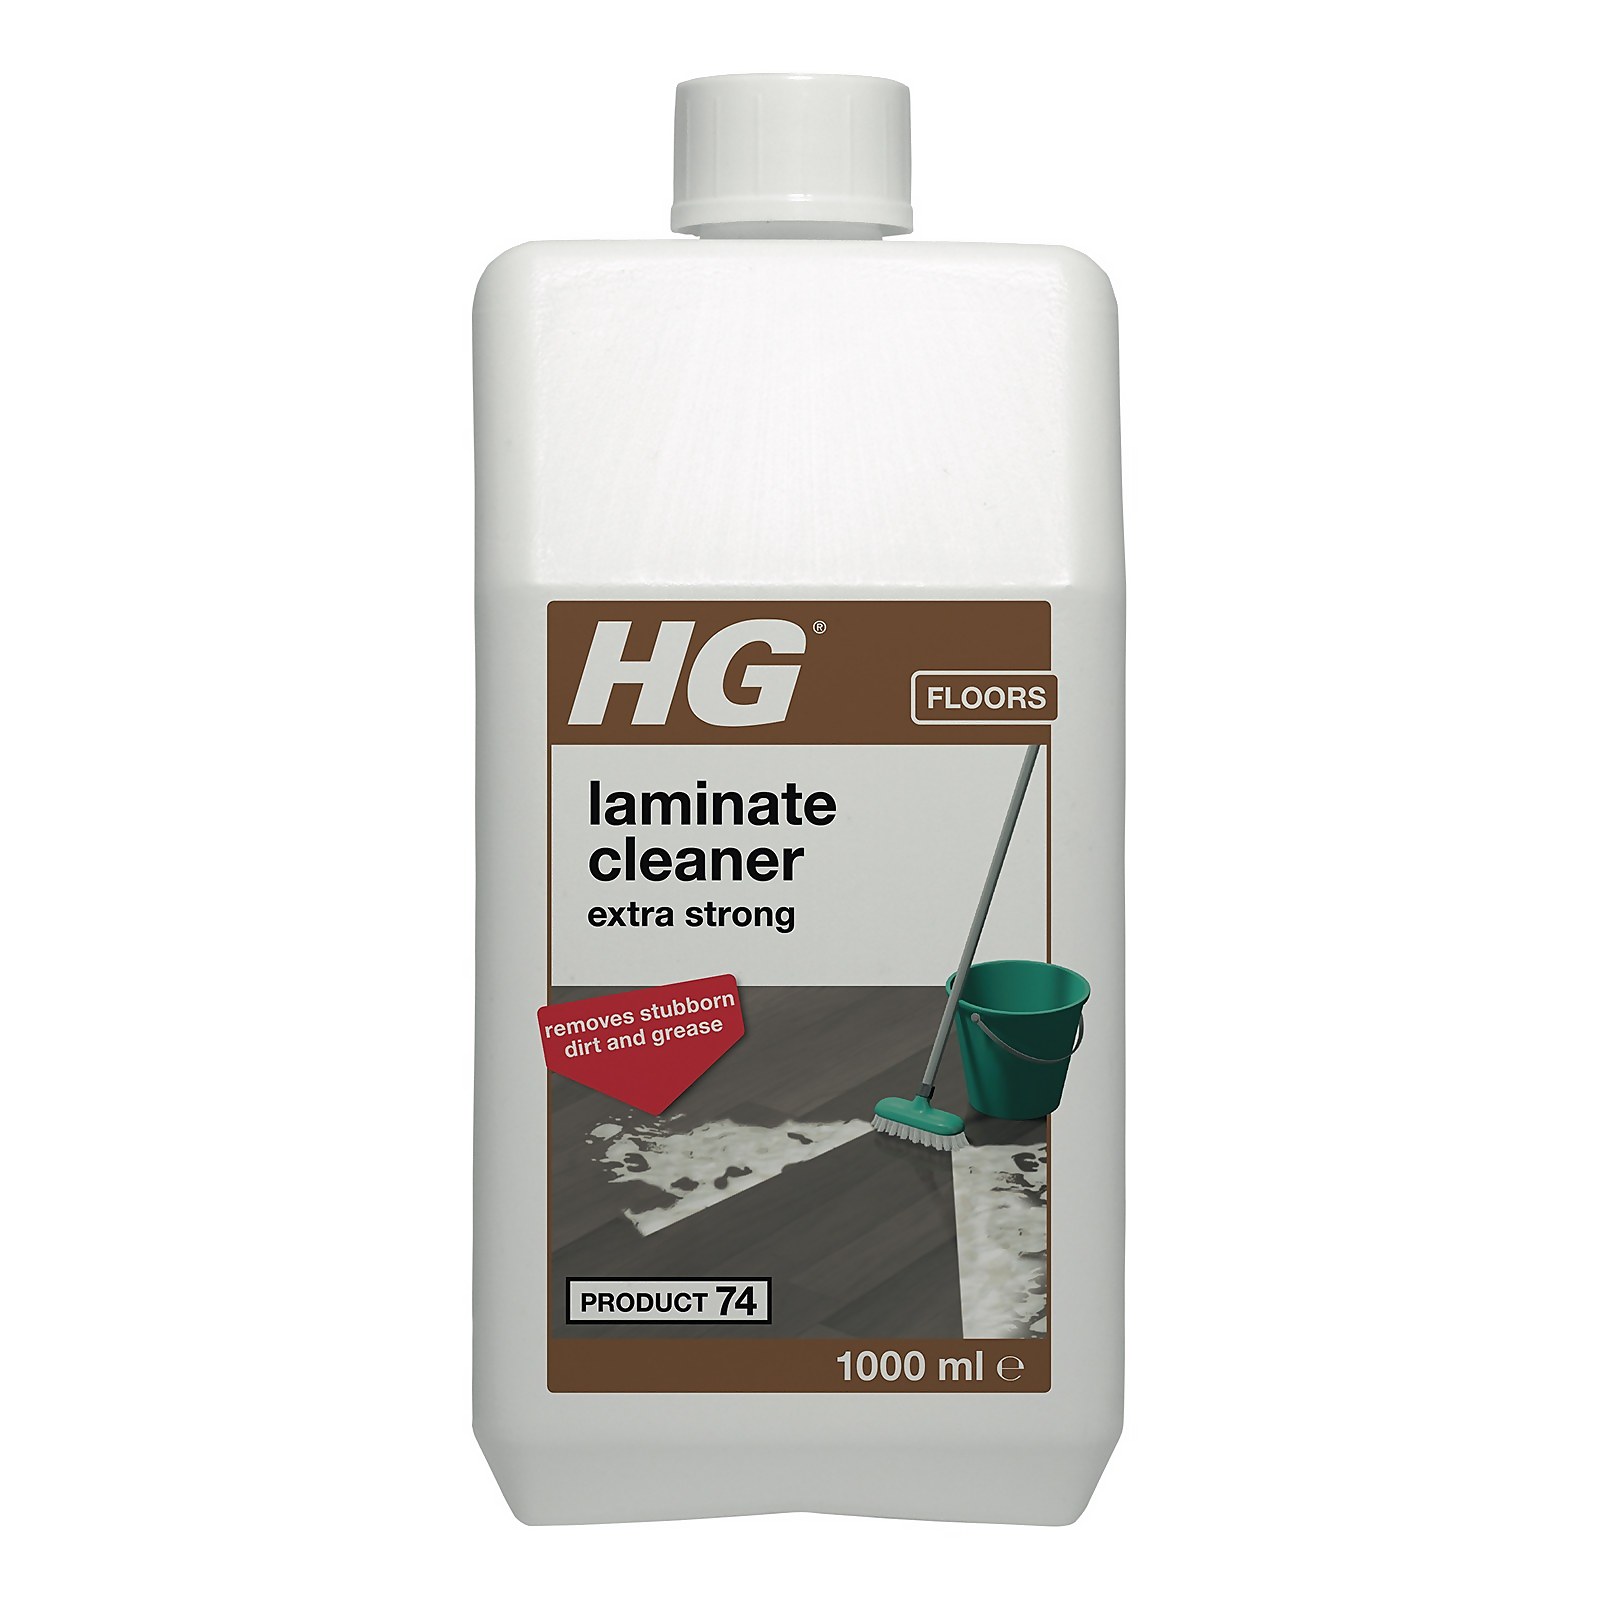 Photo of Hg Laminate Power Cleaner -product 74- 1l